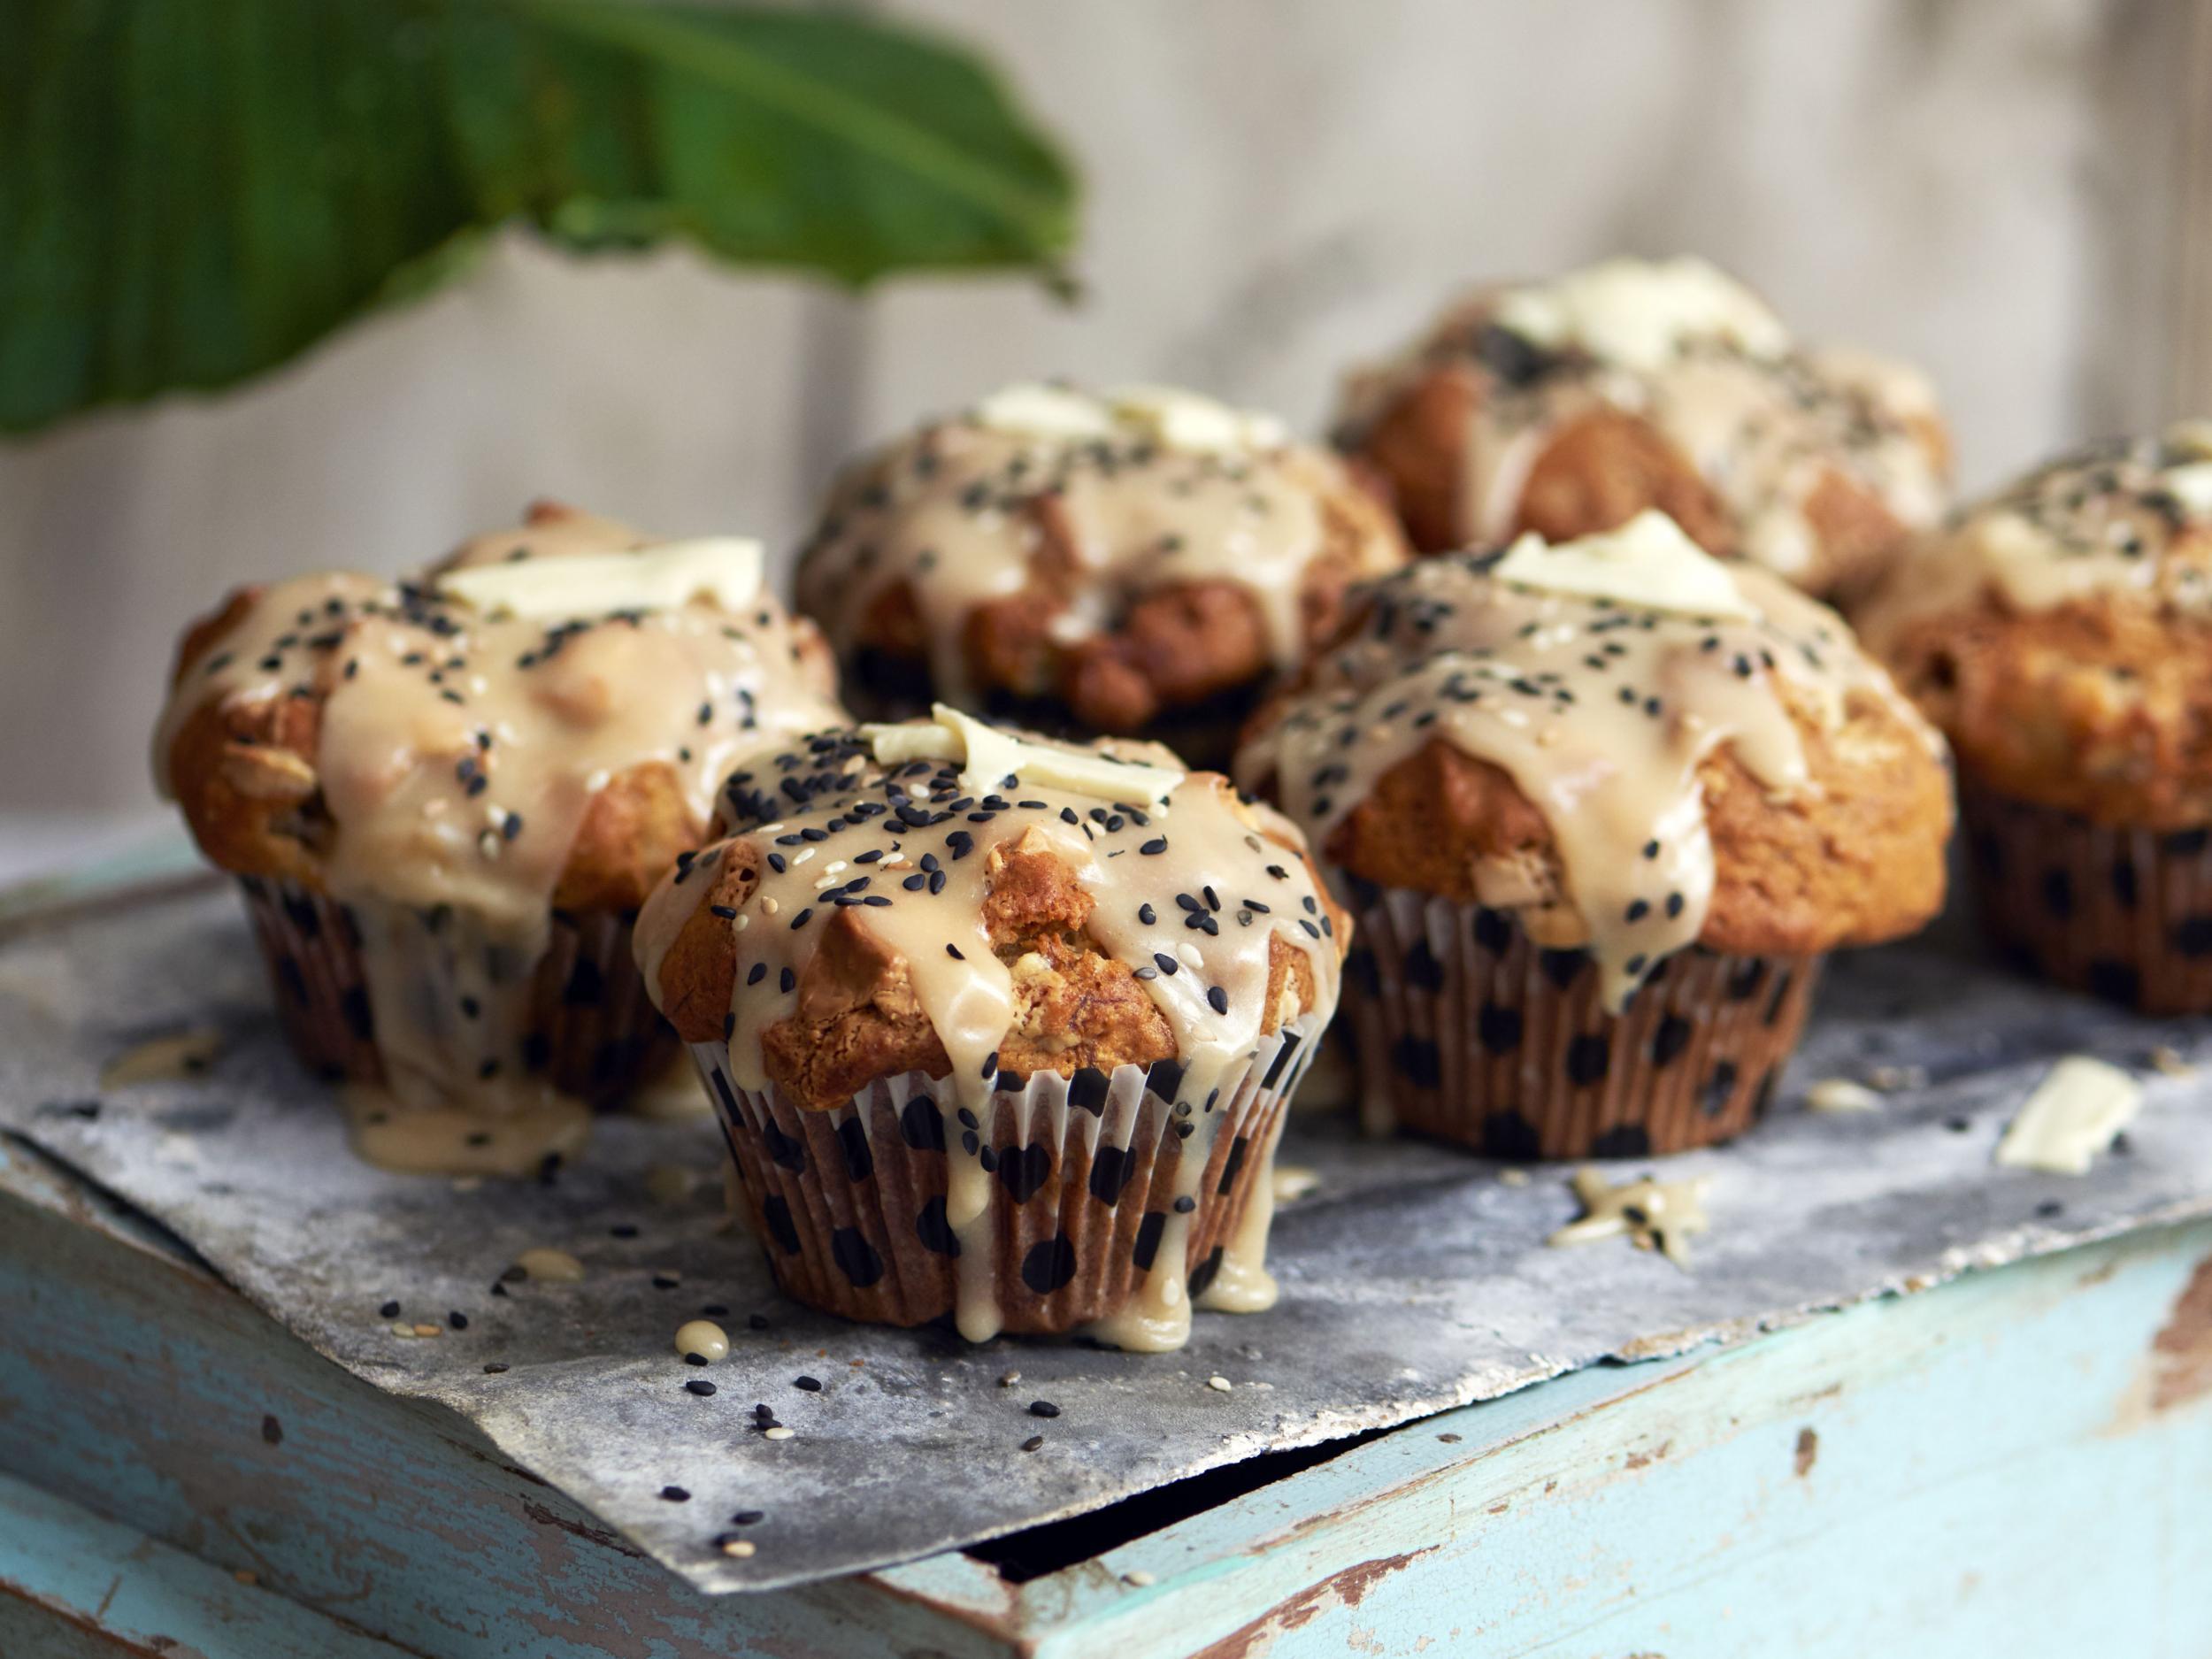 These tahini-glazed muffins are the best thing since banana bread